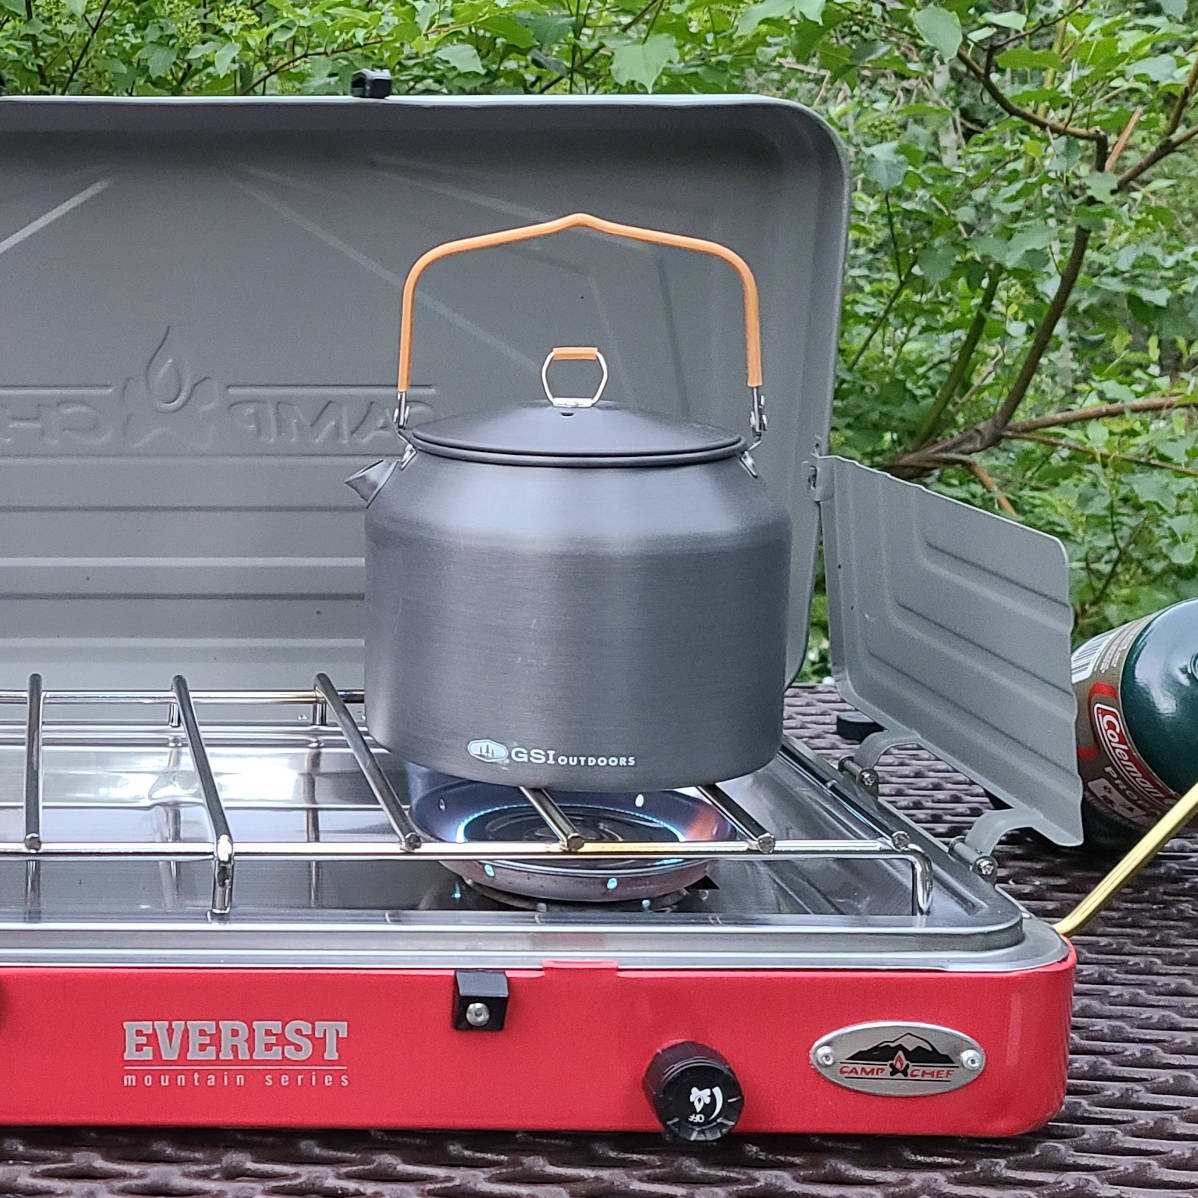 Kettle boiling water on a camp stove - HelloTrail